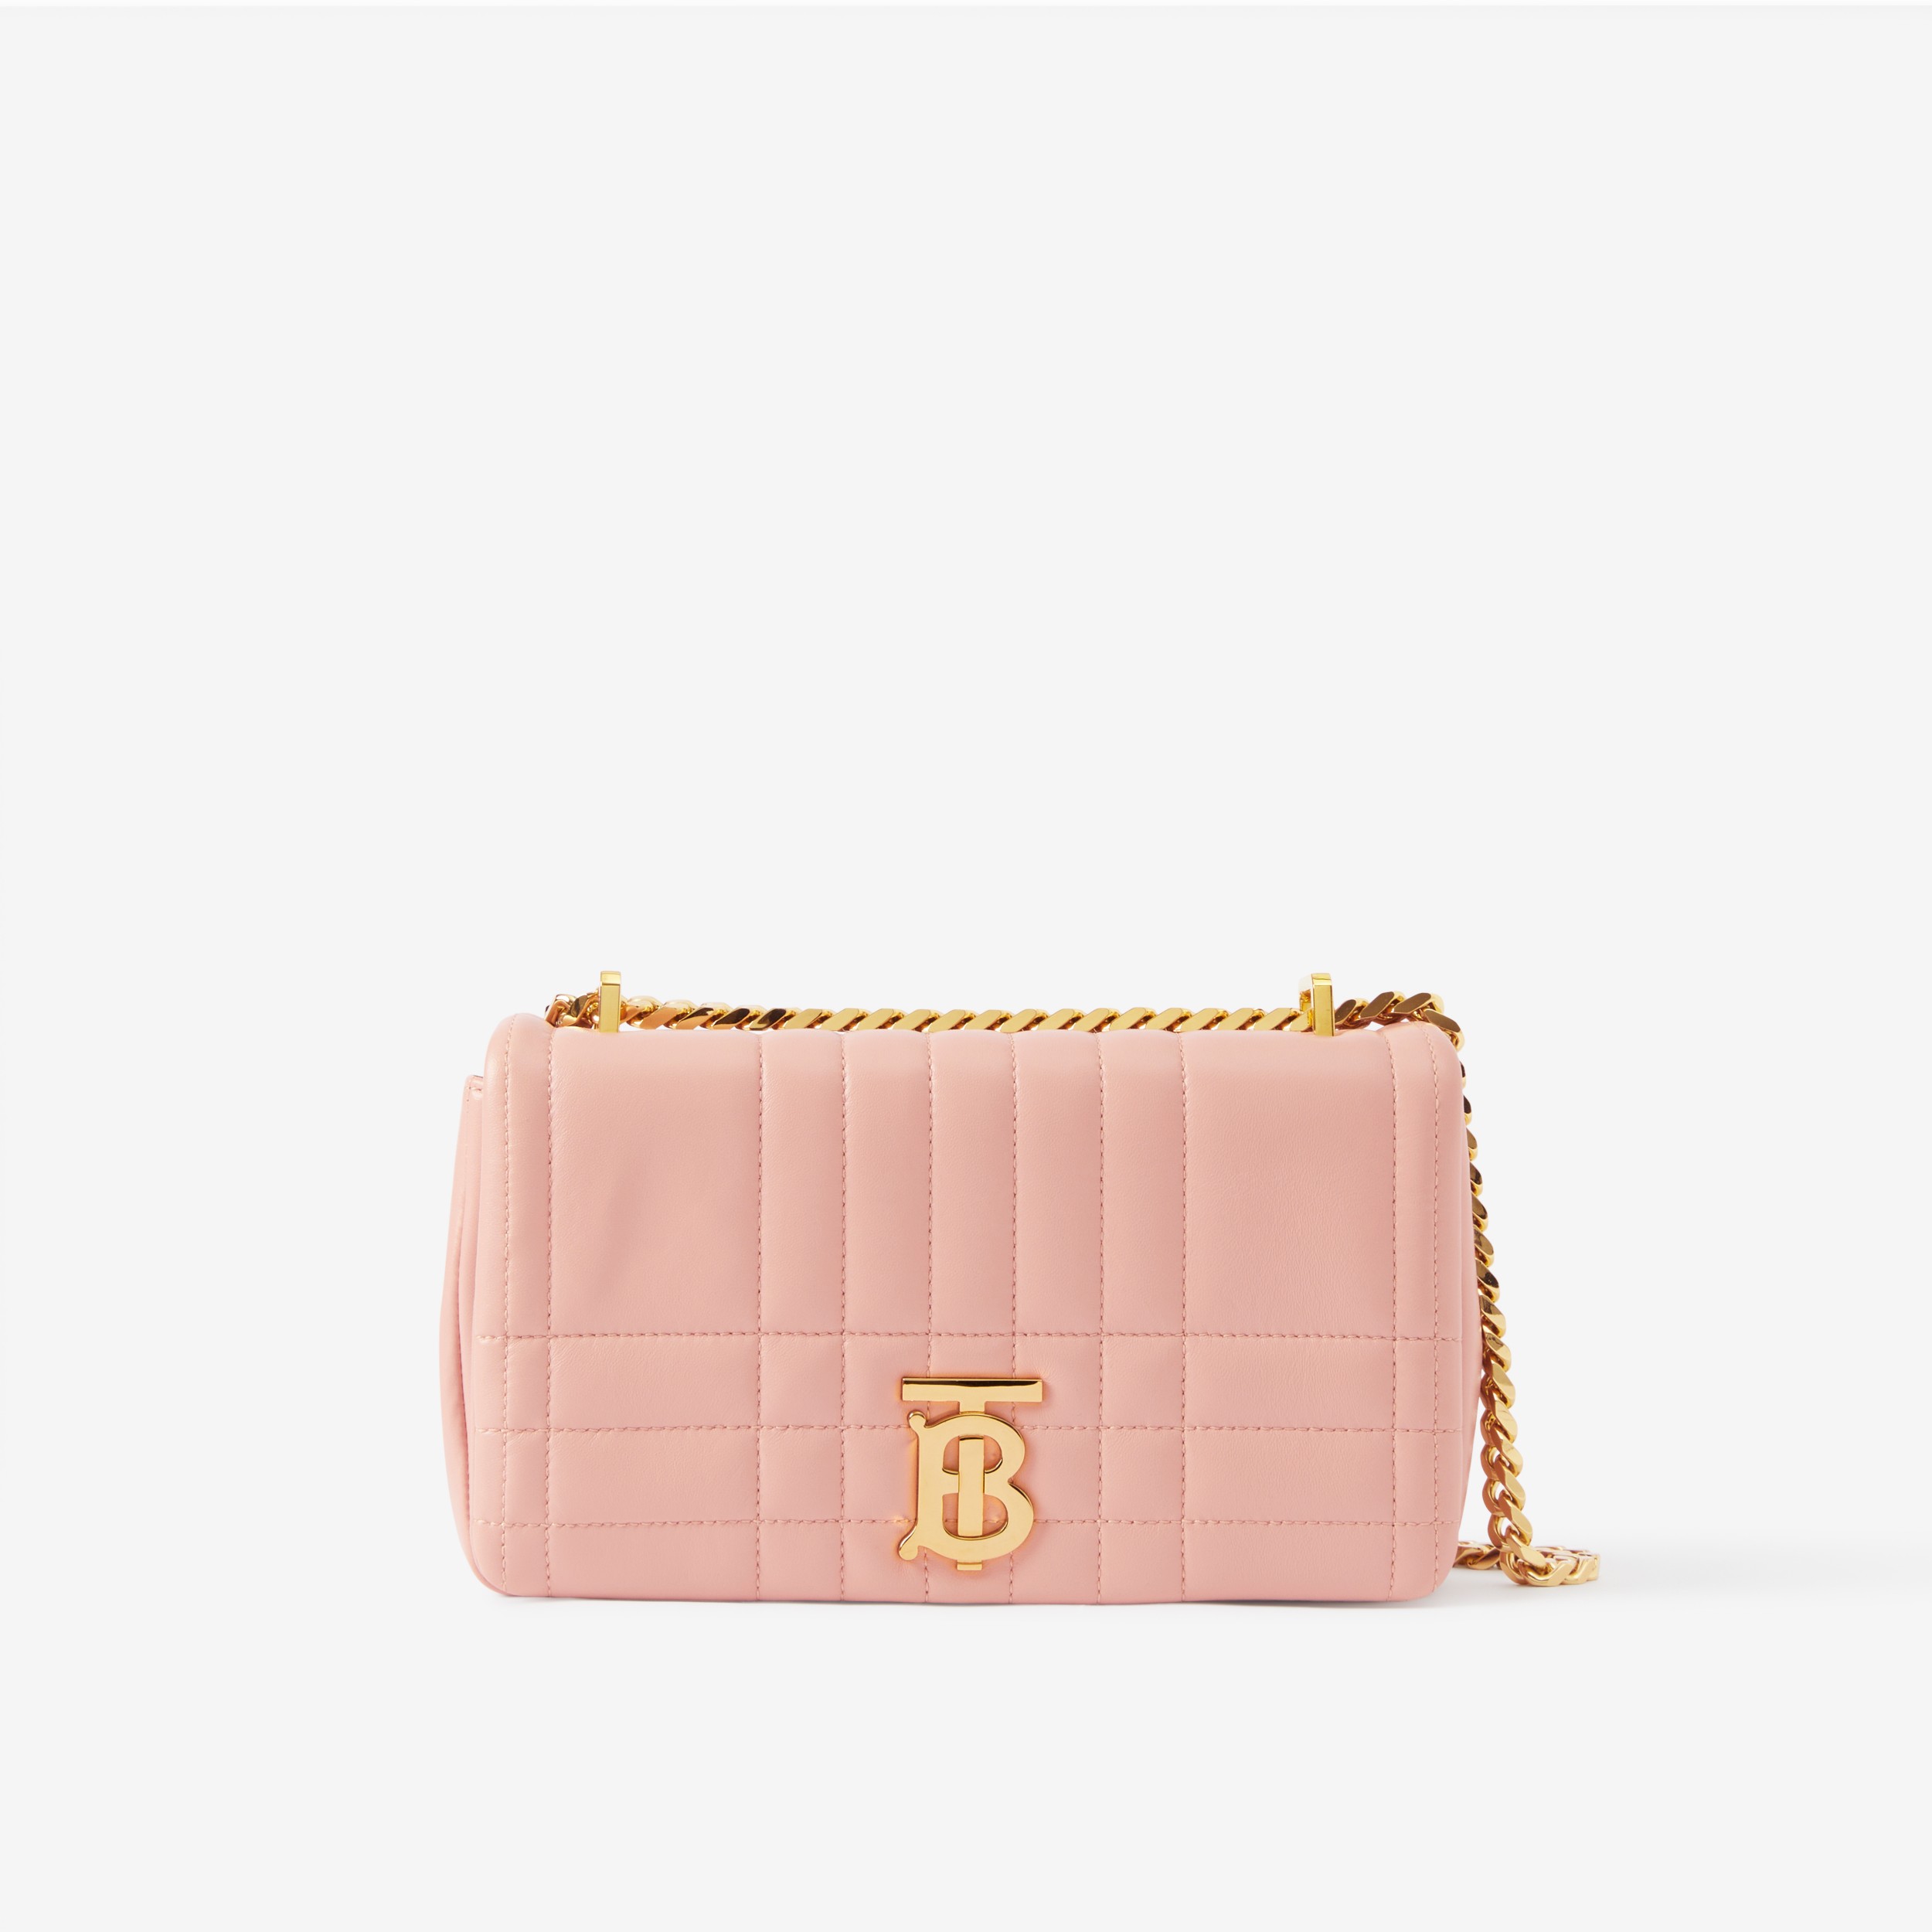 Total 72+ imagen burberry small pink bag